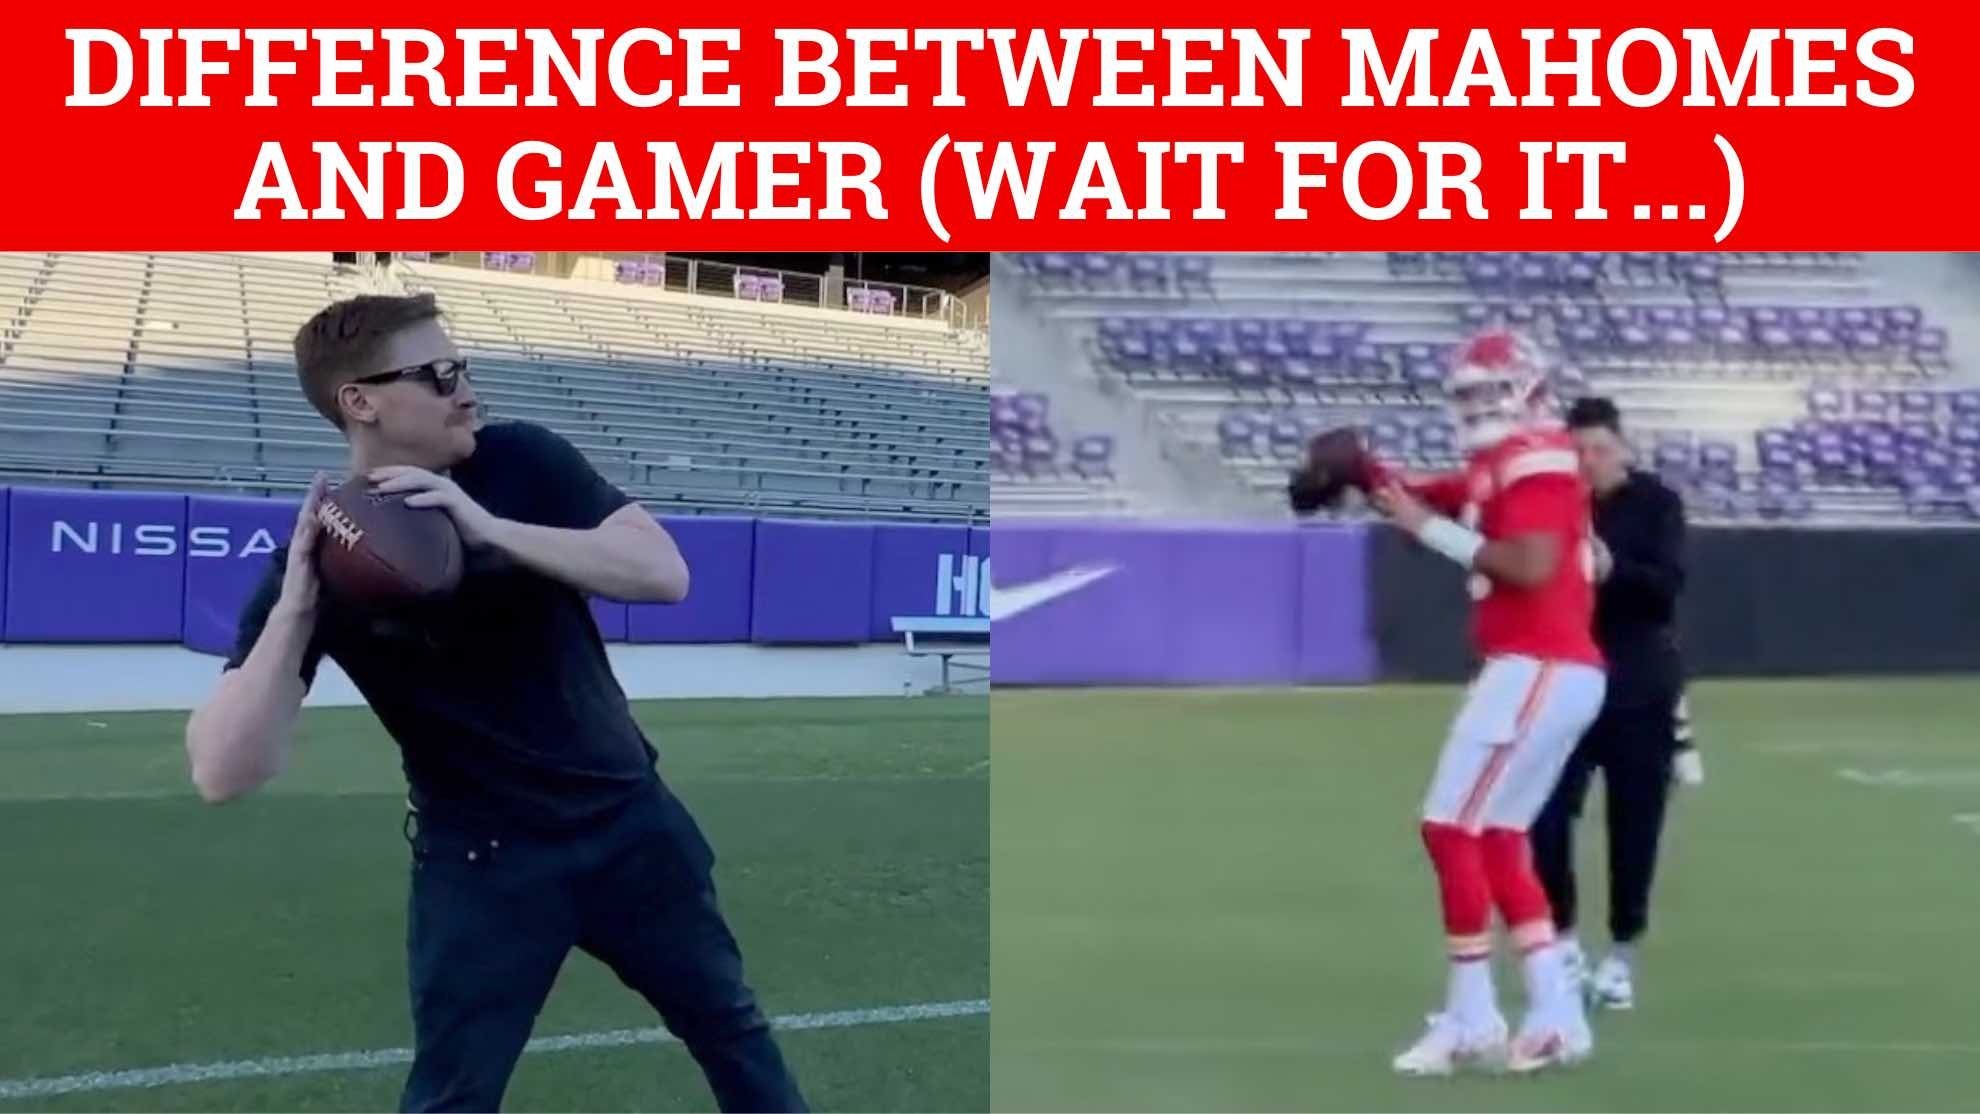 Patrick Mahomes behind the back pass puts online gamer to shame